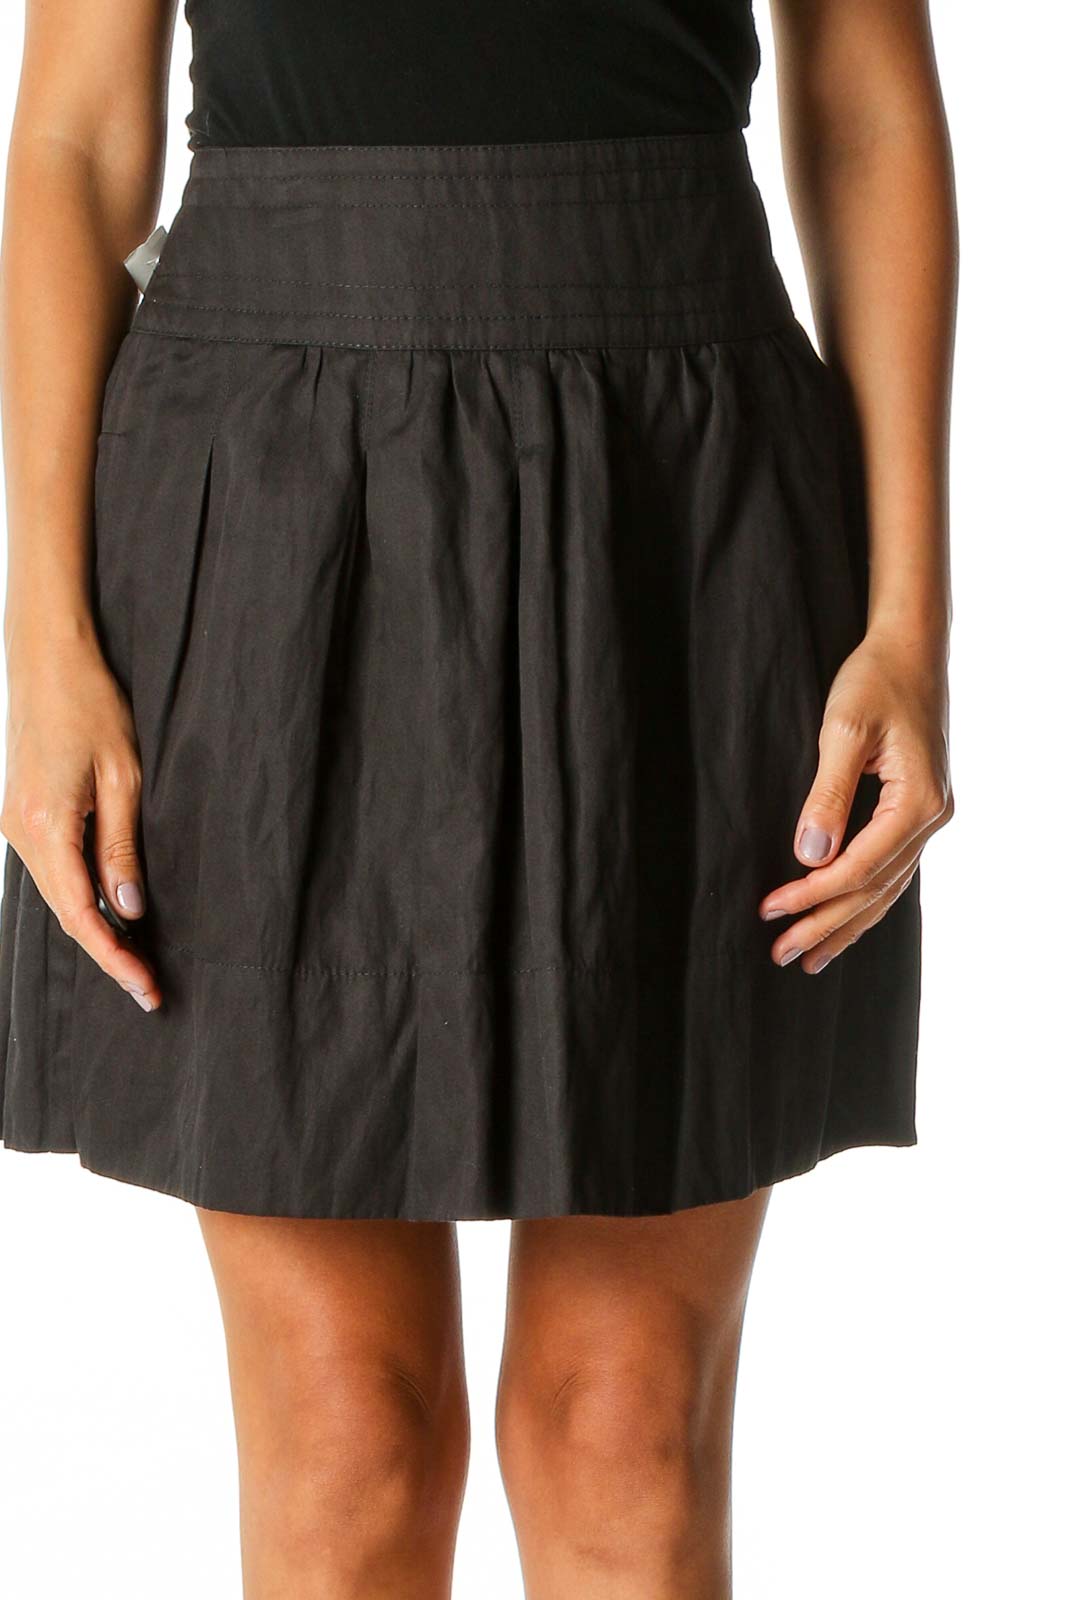 Black Chic Pleated Skirt Front